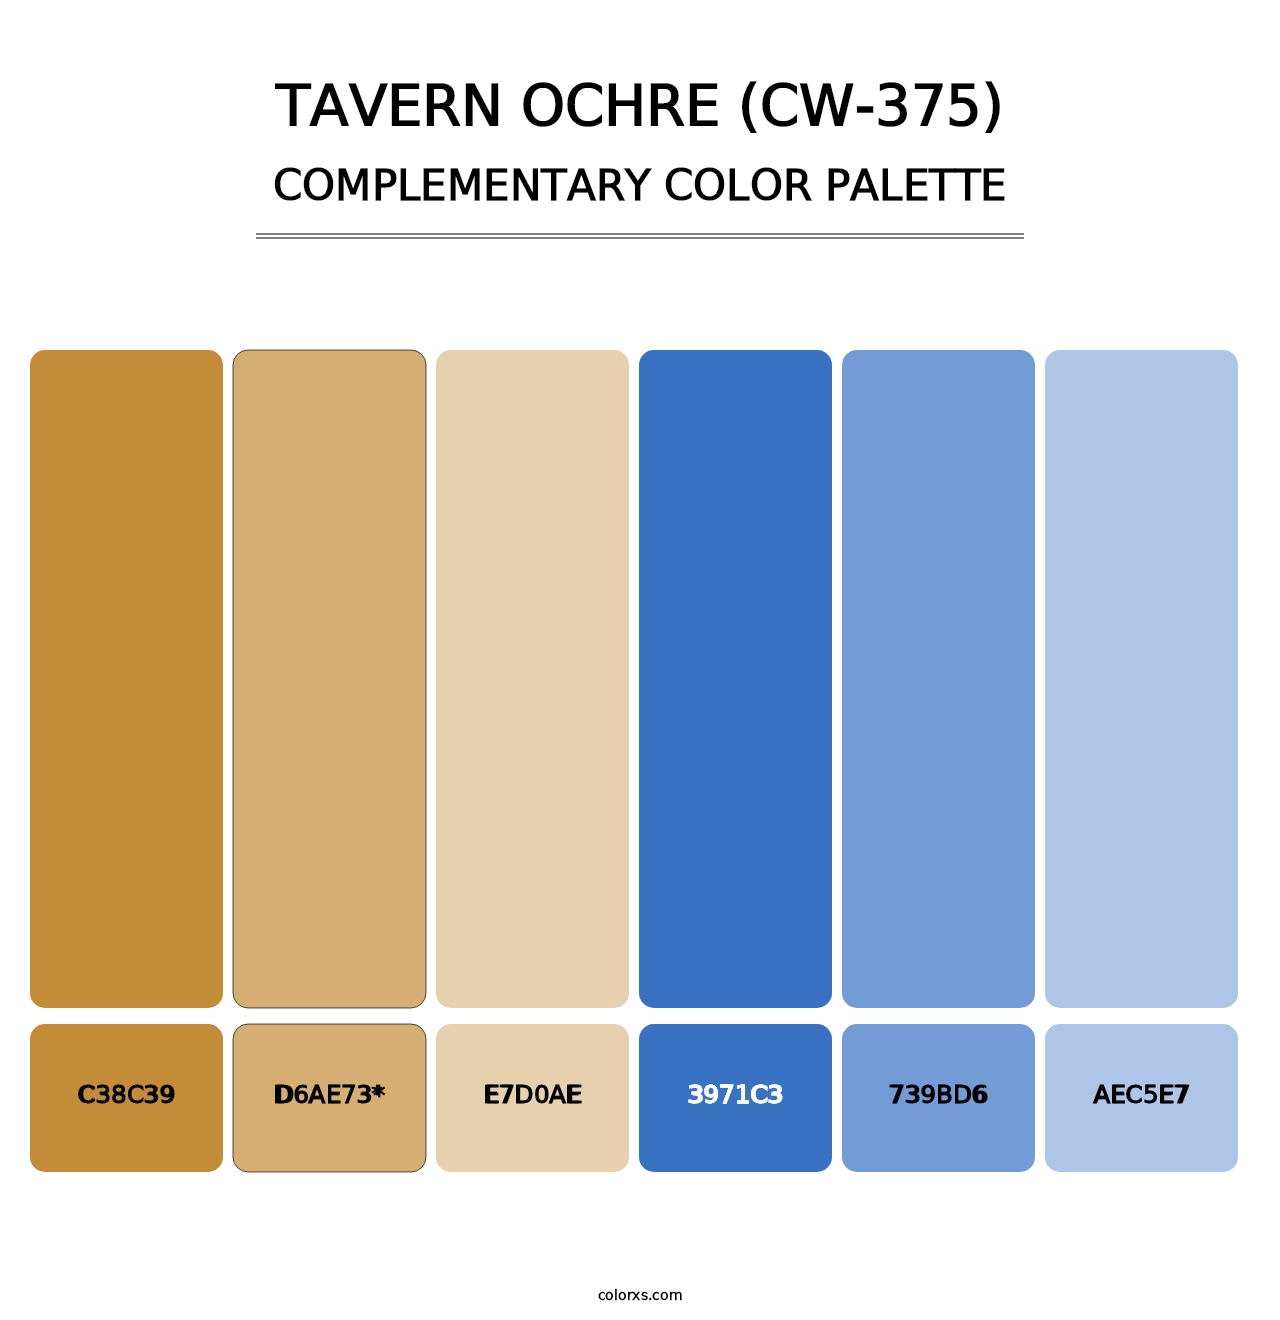 Tavern Ochre (CW-375) - Complementary Color Palette